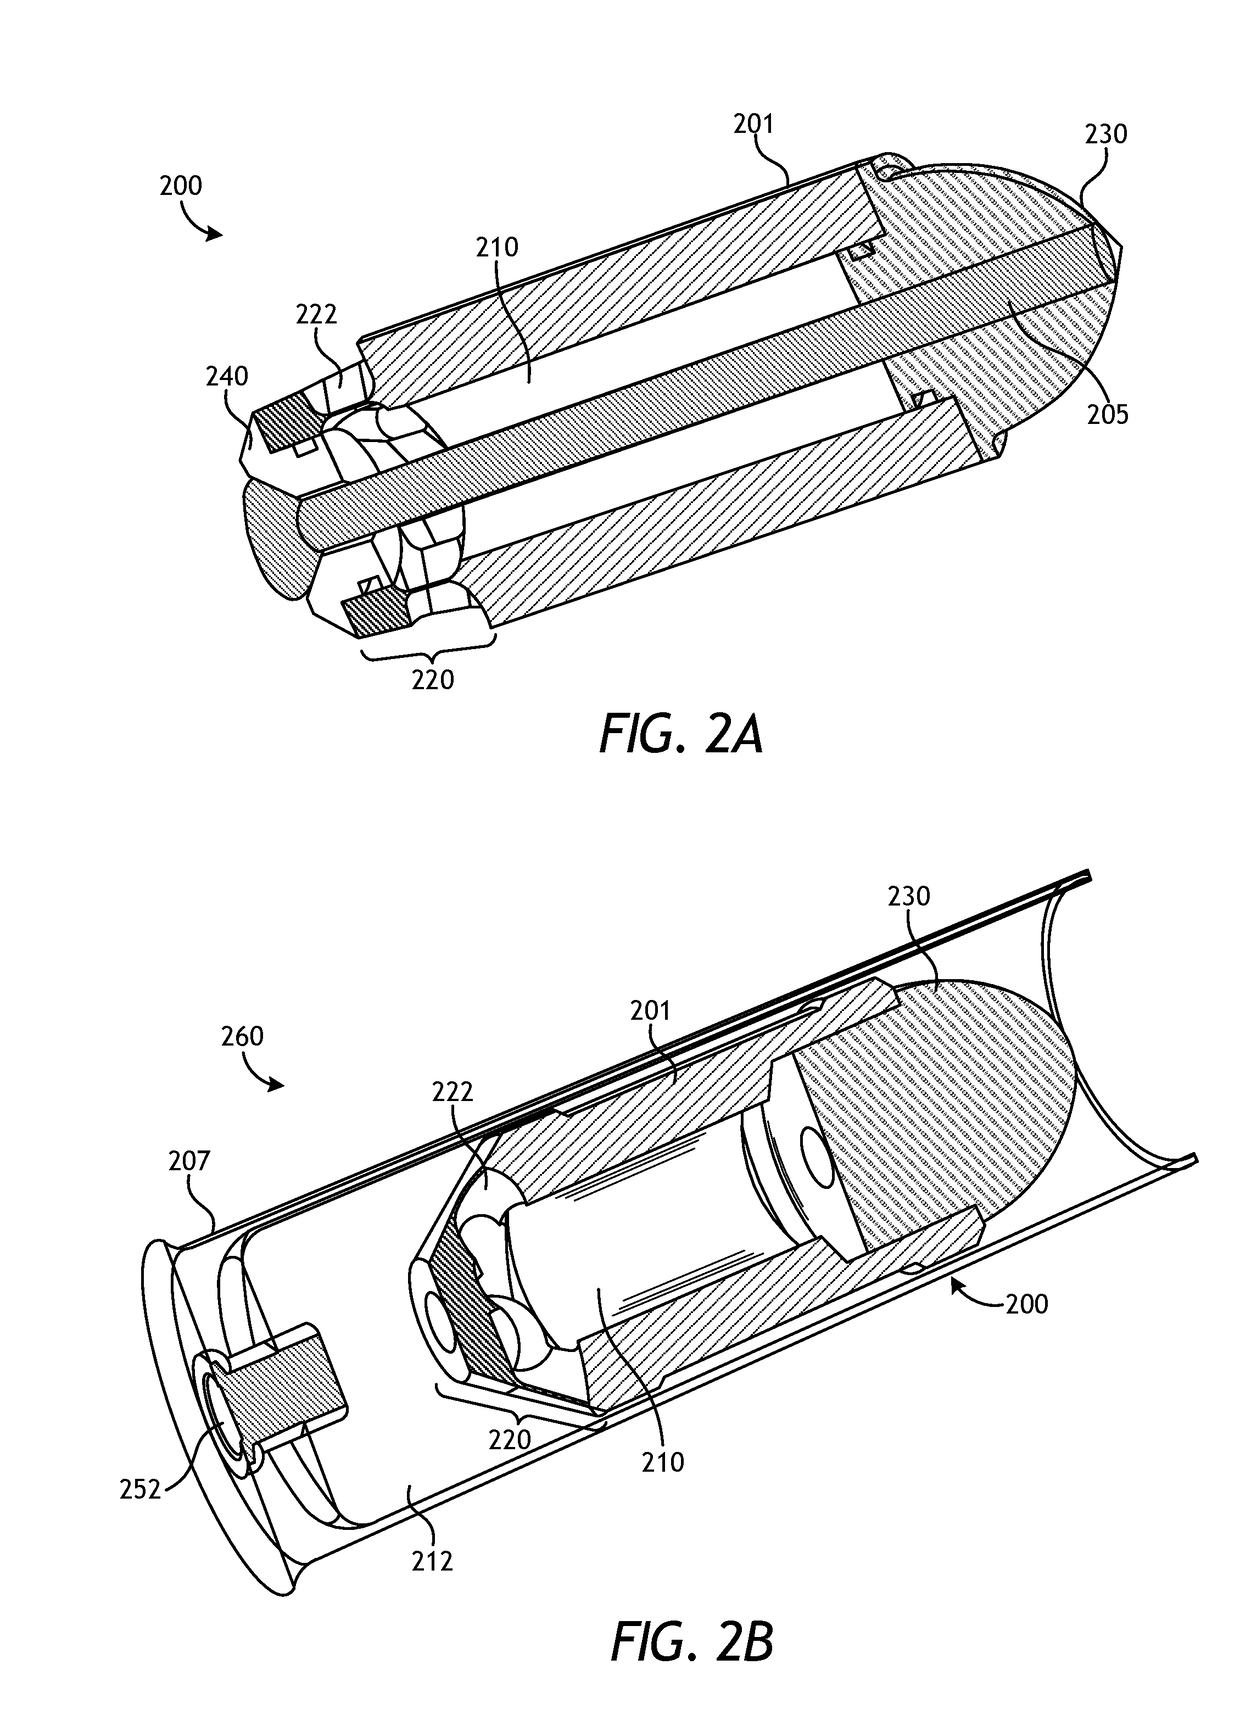 Self contained internal chamber for a projectile